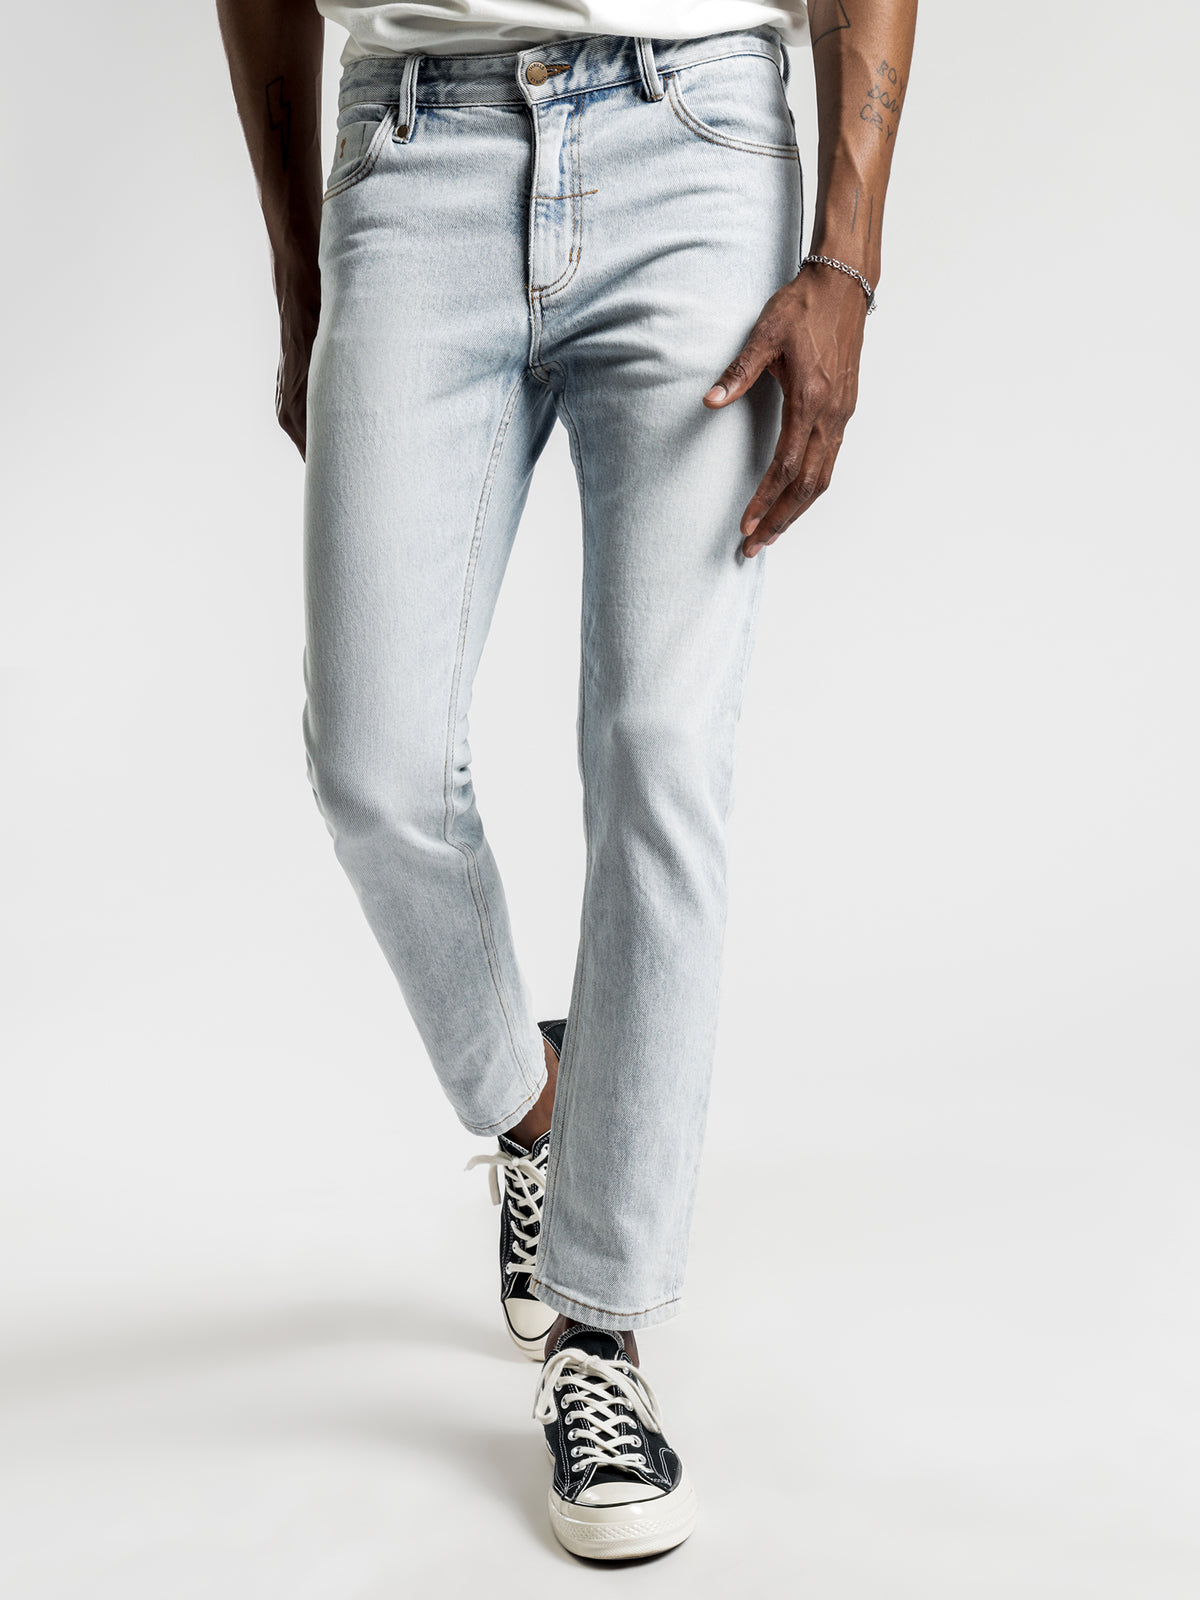 Bones Mid-Rise Straight Leg Jeans in Time Worn Blue